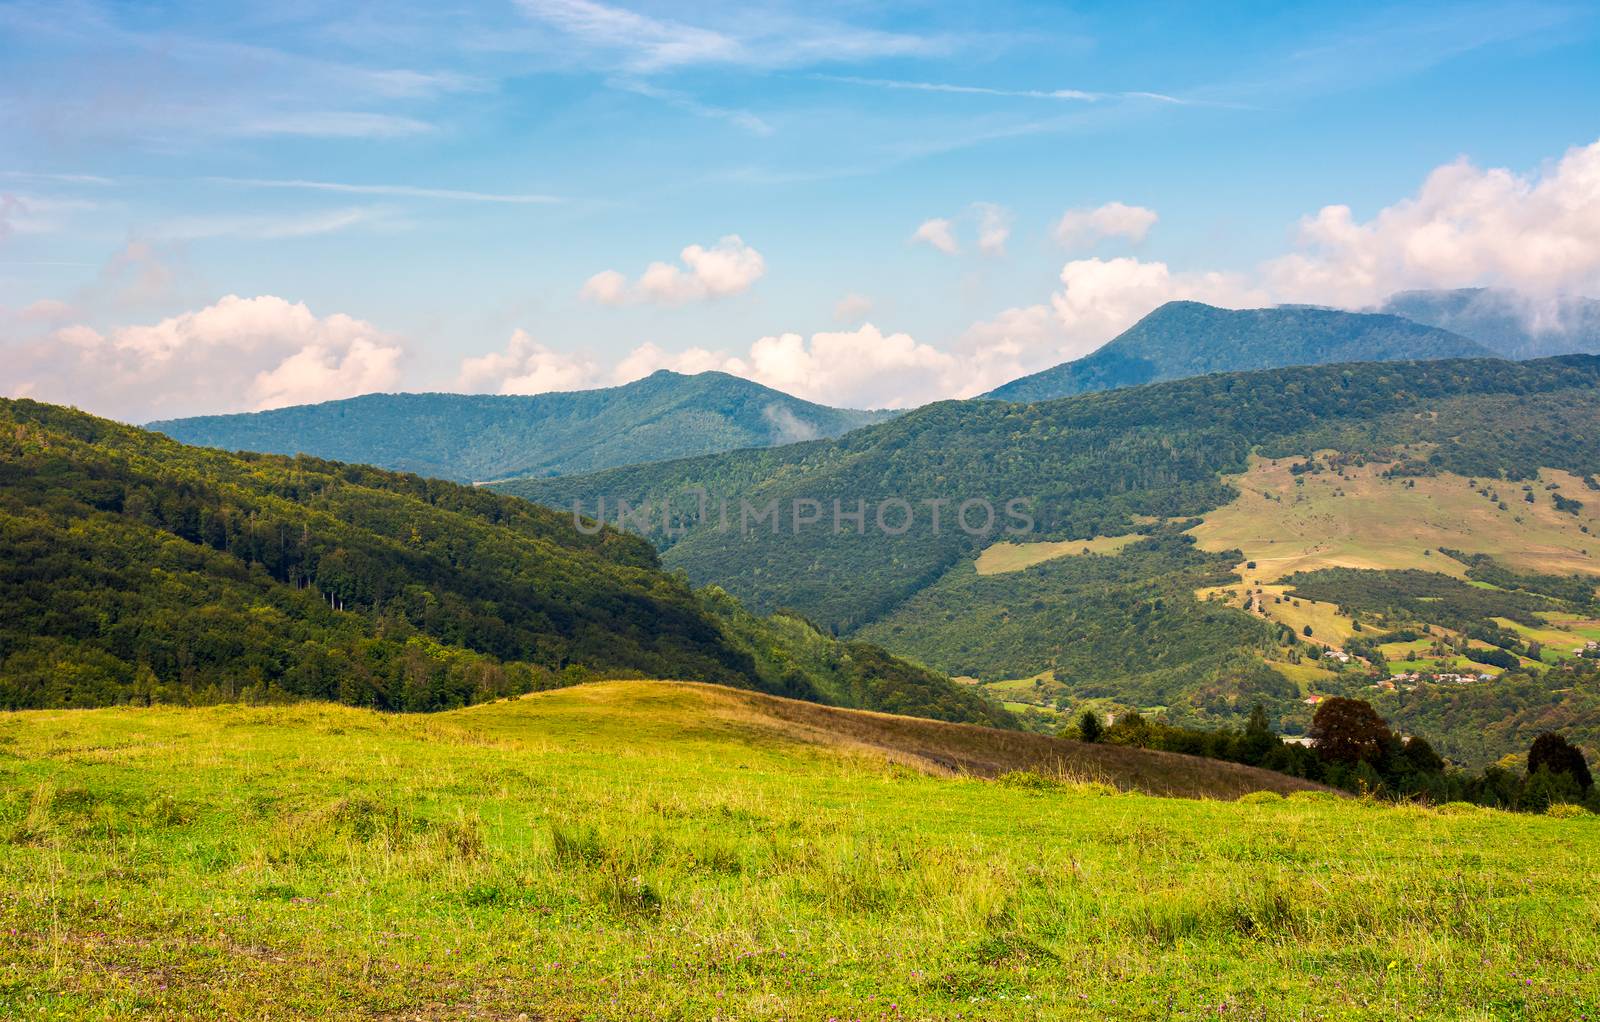 grassy hill in late summer. beautiful mountainous landscape on a cloudy day